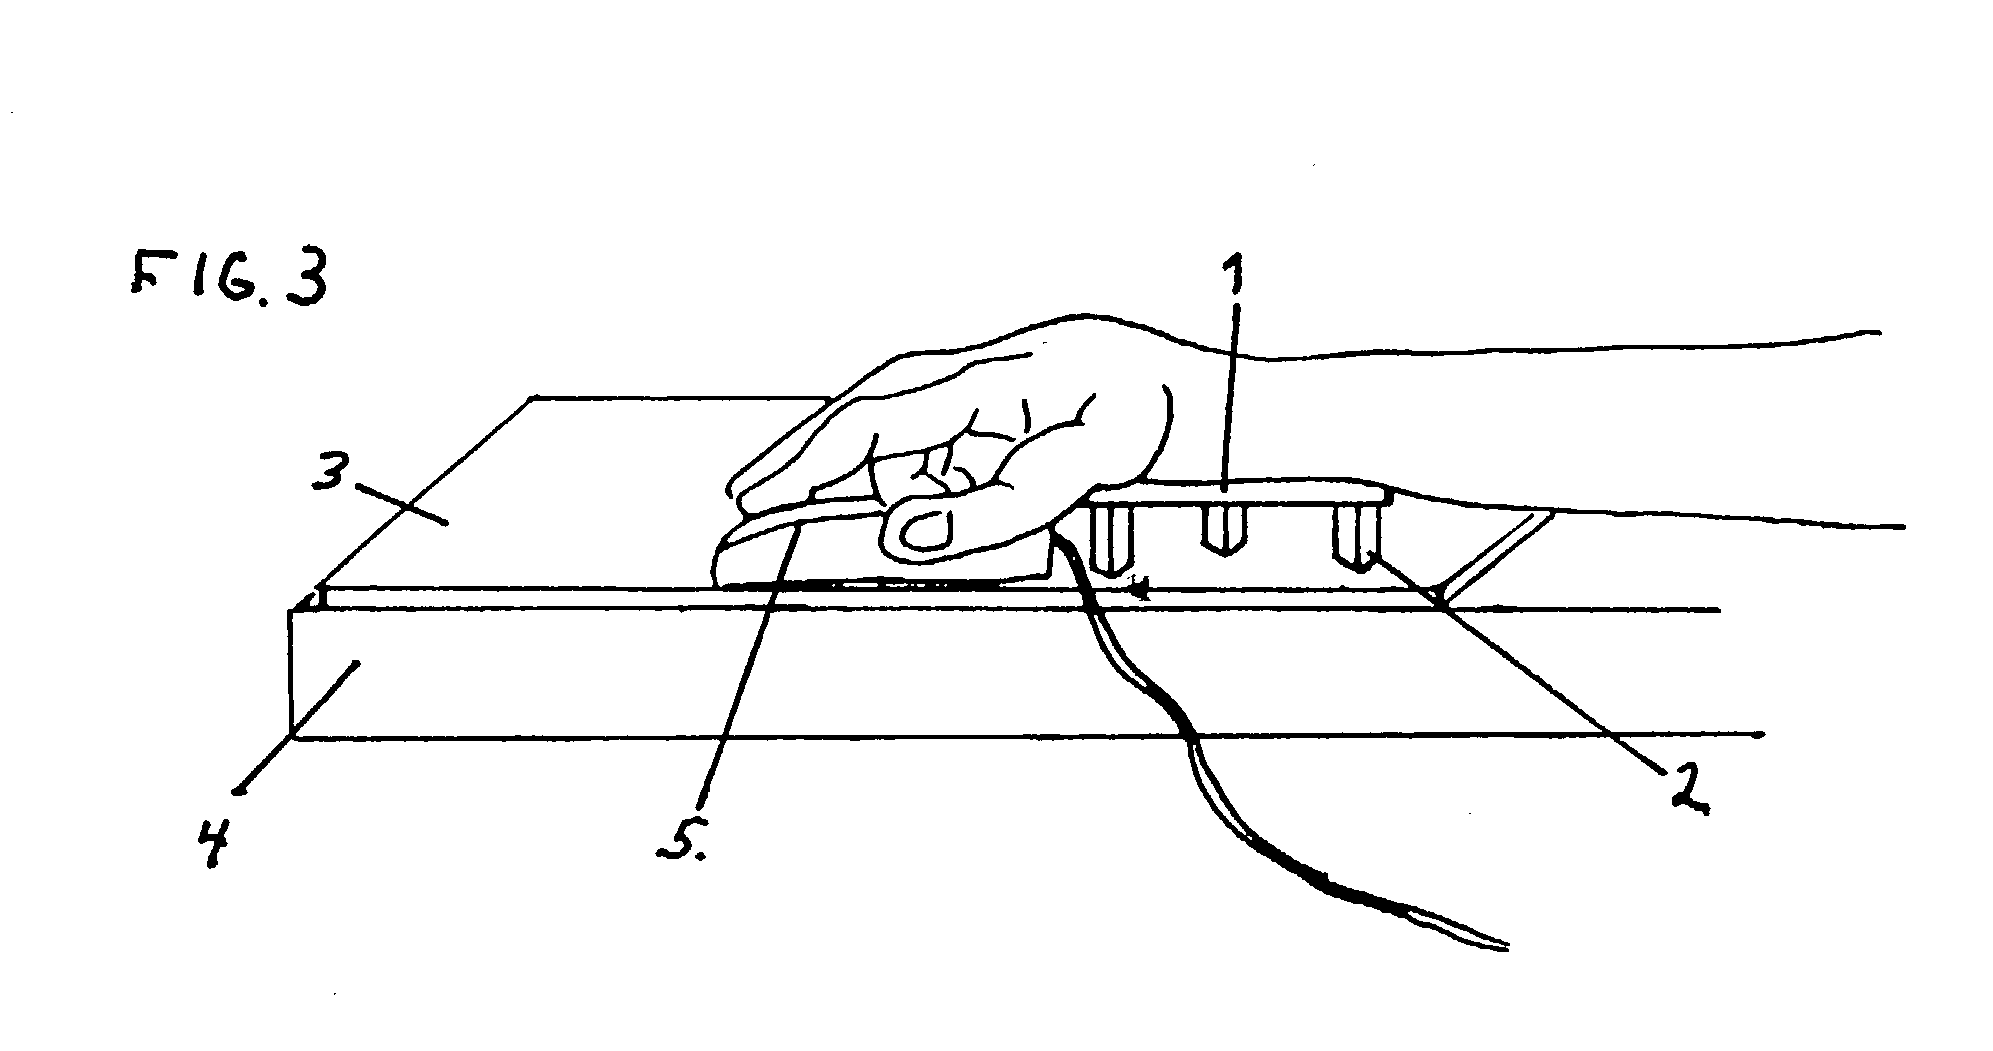 Mouse rest for hand and wrist